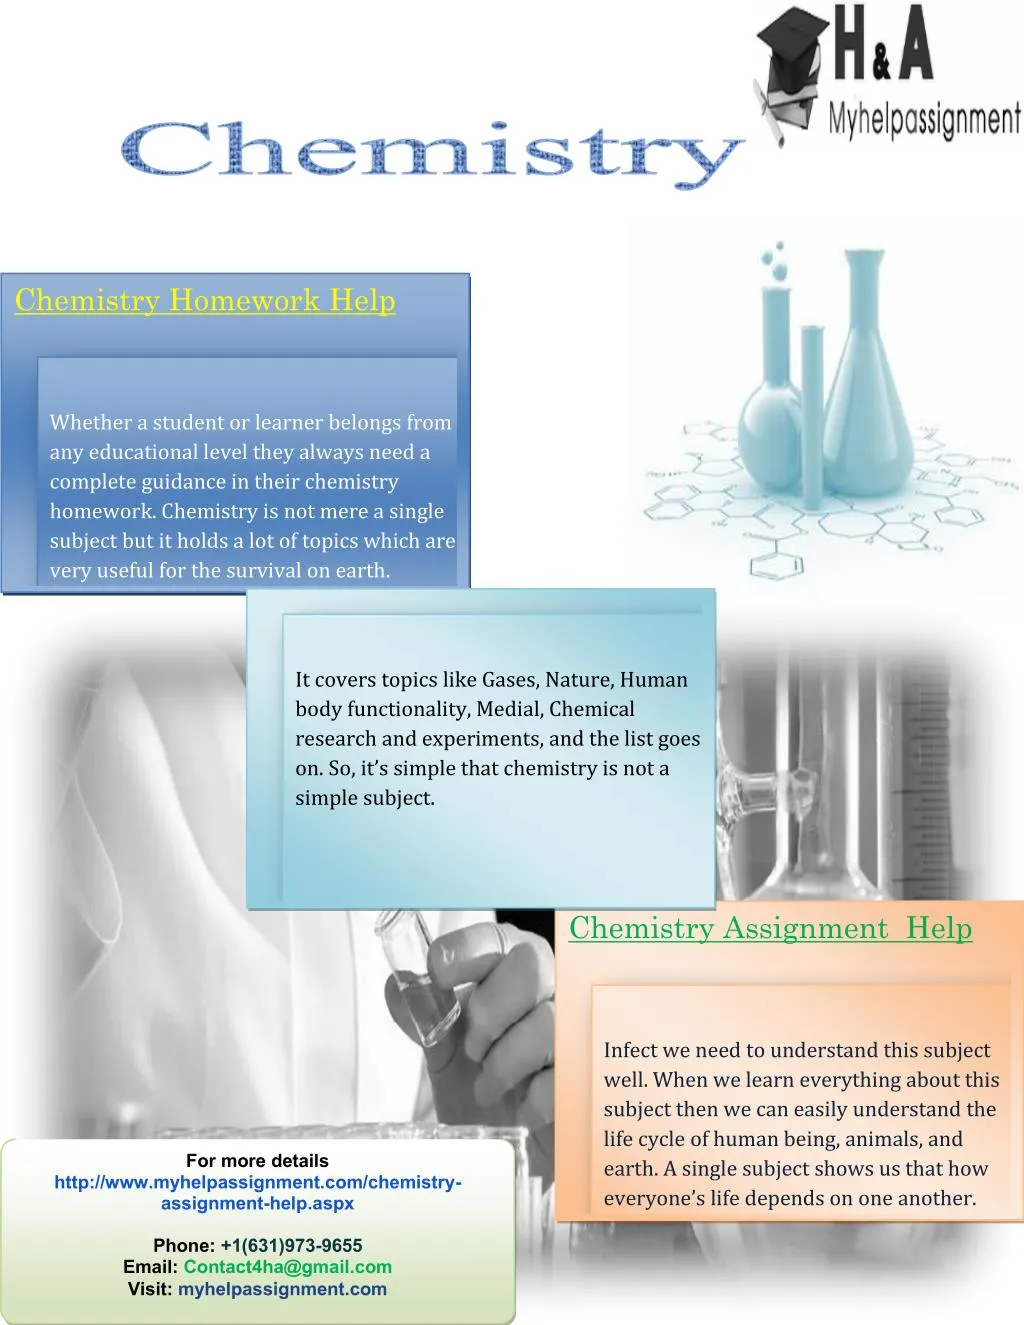 Chemistry assignment help